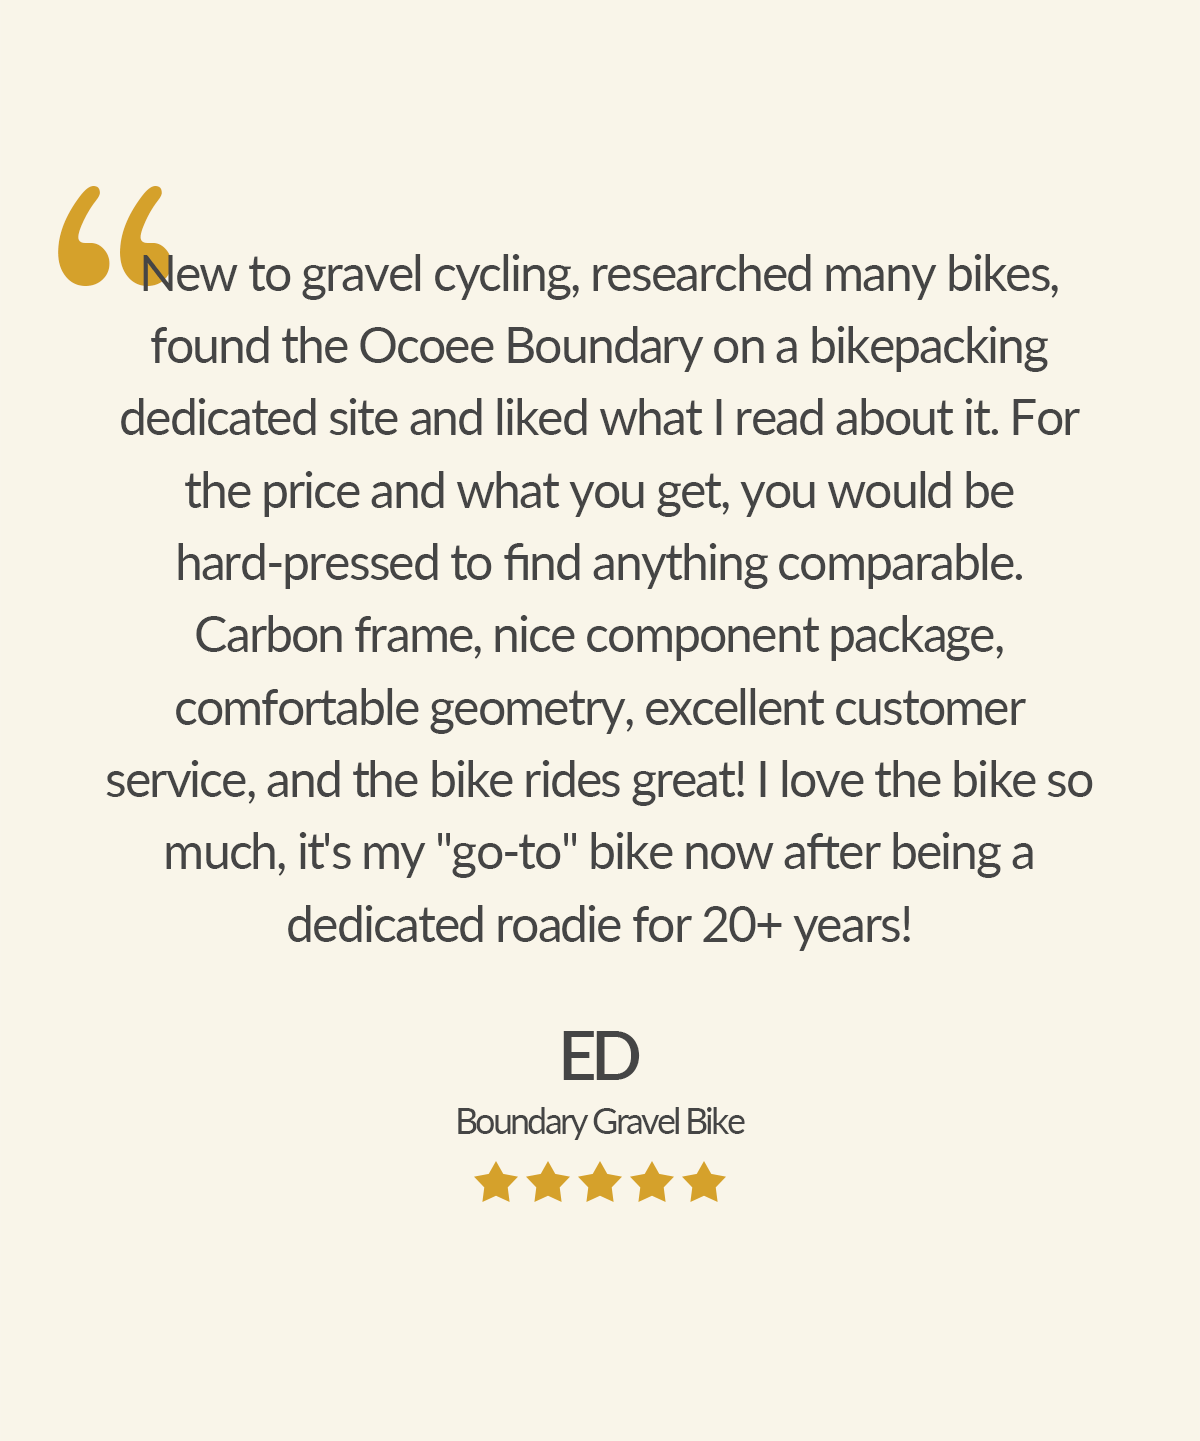 Check out what customers have said about their Ocoee bikes!